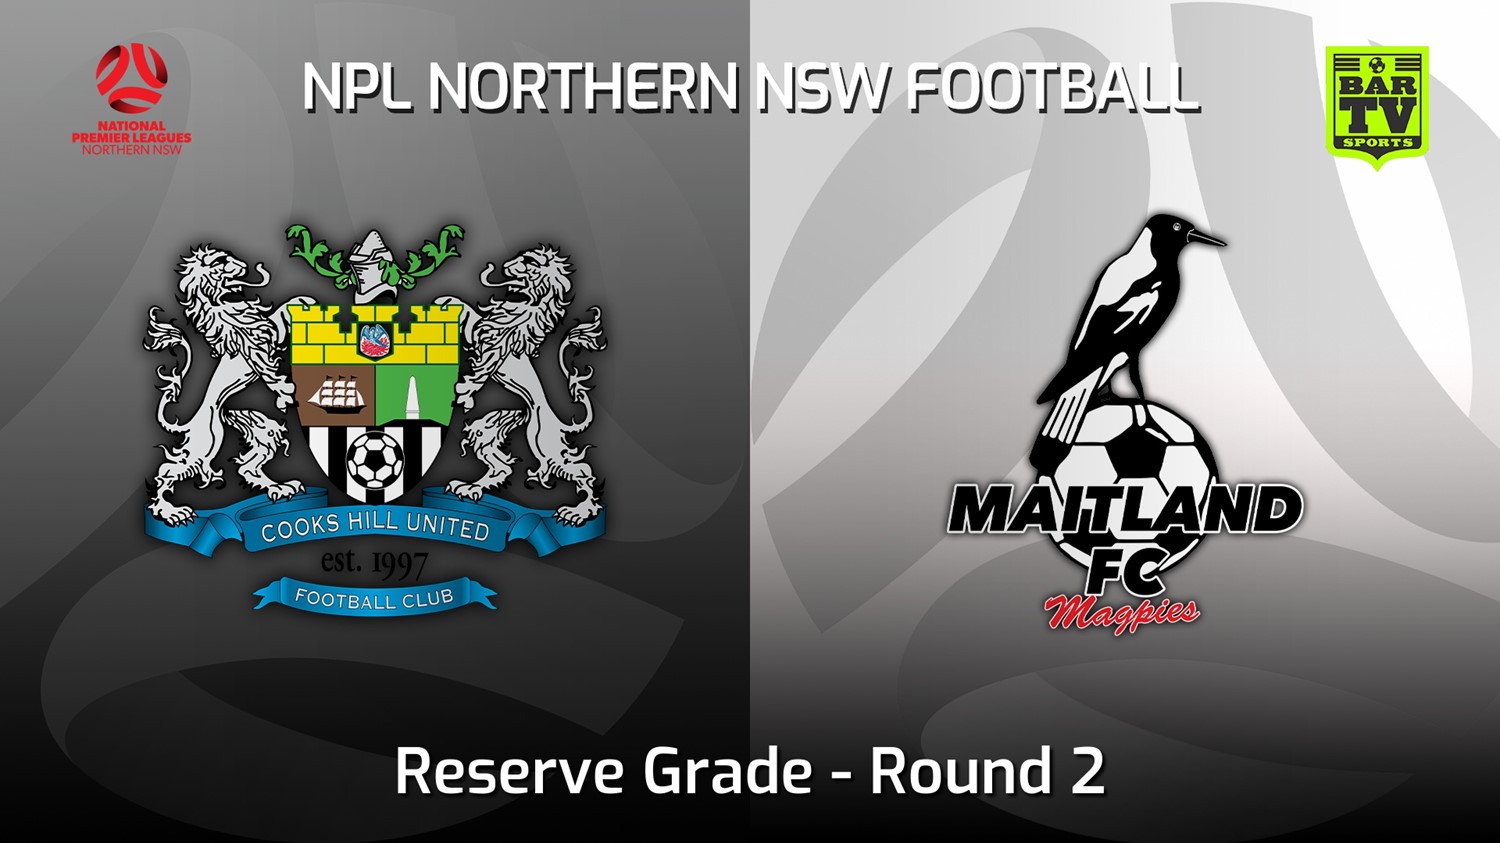 220311-NNSW NPL Res Round 2 - Cooks Hill United FC (Res) v Maitland FC Res Minigame Slate Image